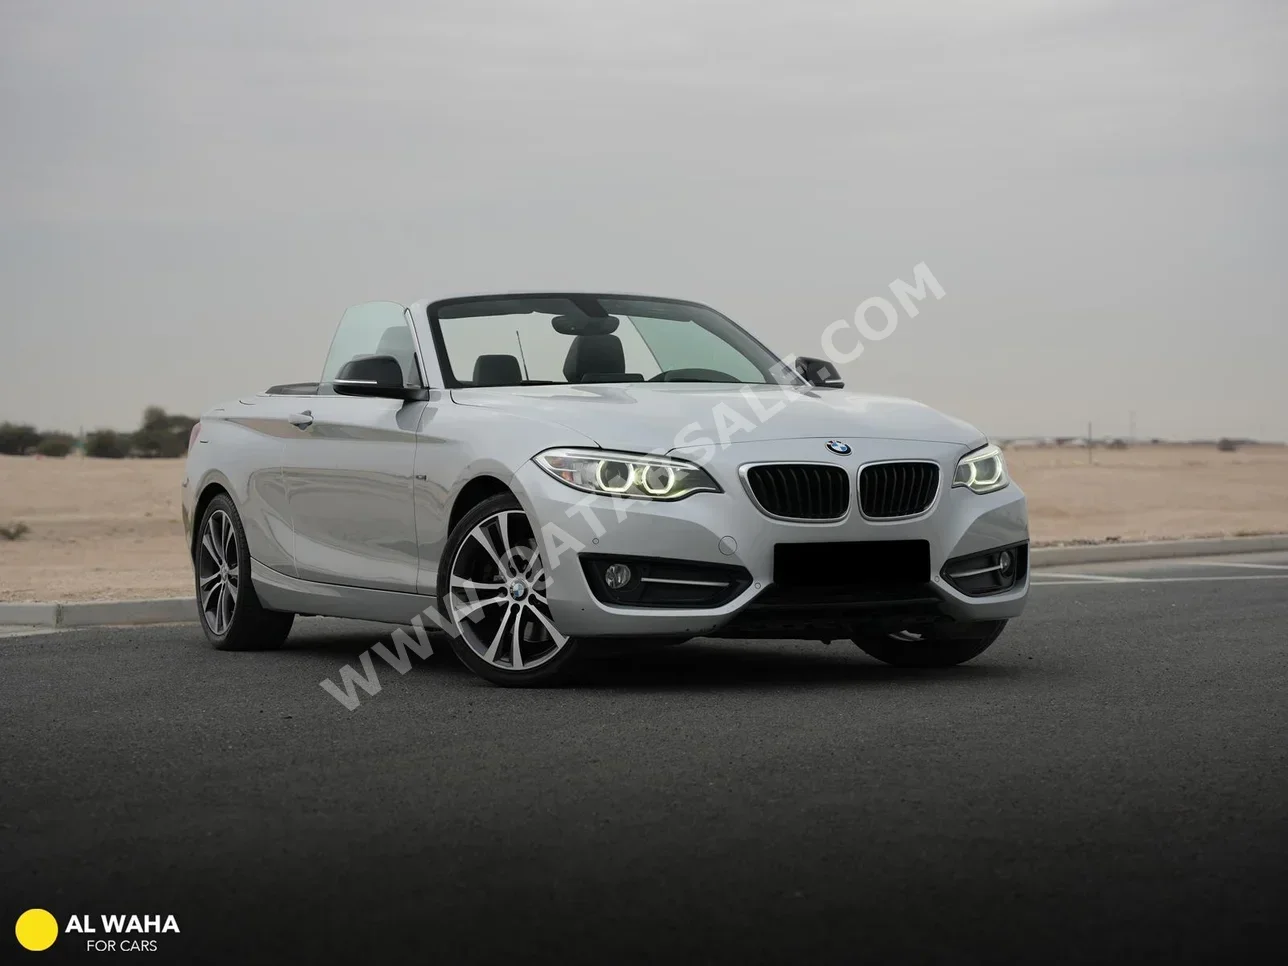 BMW  2-Series  228i  2016  Automatic  50,000 Km  4 Cylinder  Rear Wheel Drive (RWD)  Convertible  Silver